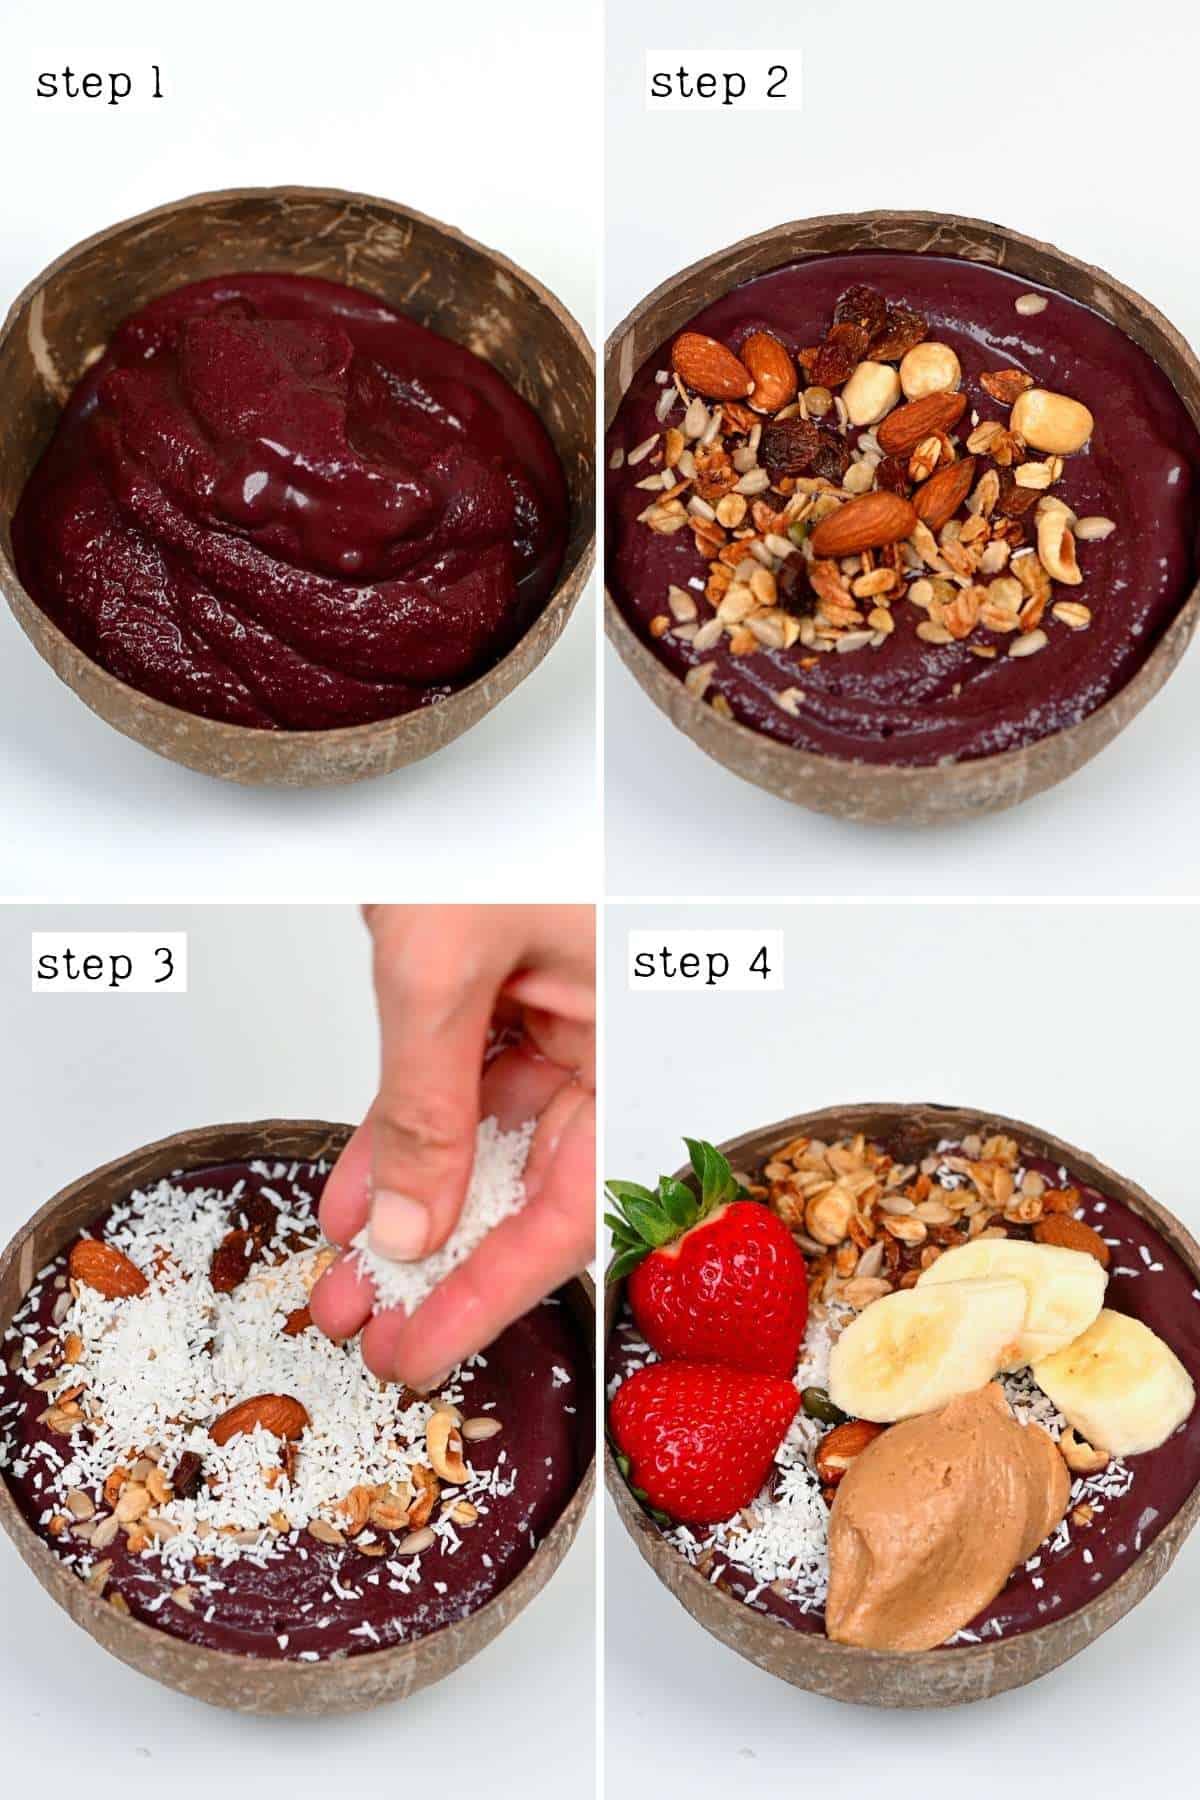 Steps for putting together an acai bowl